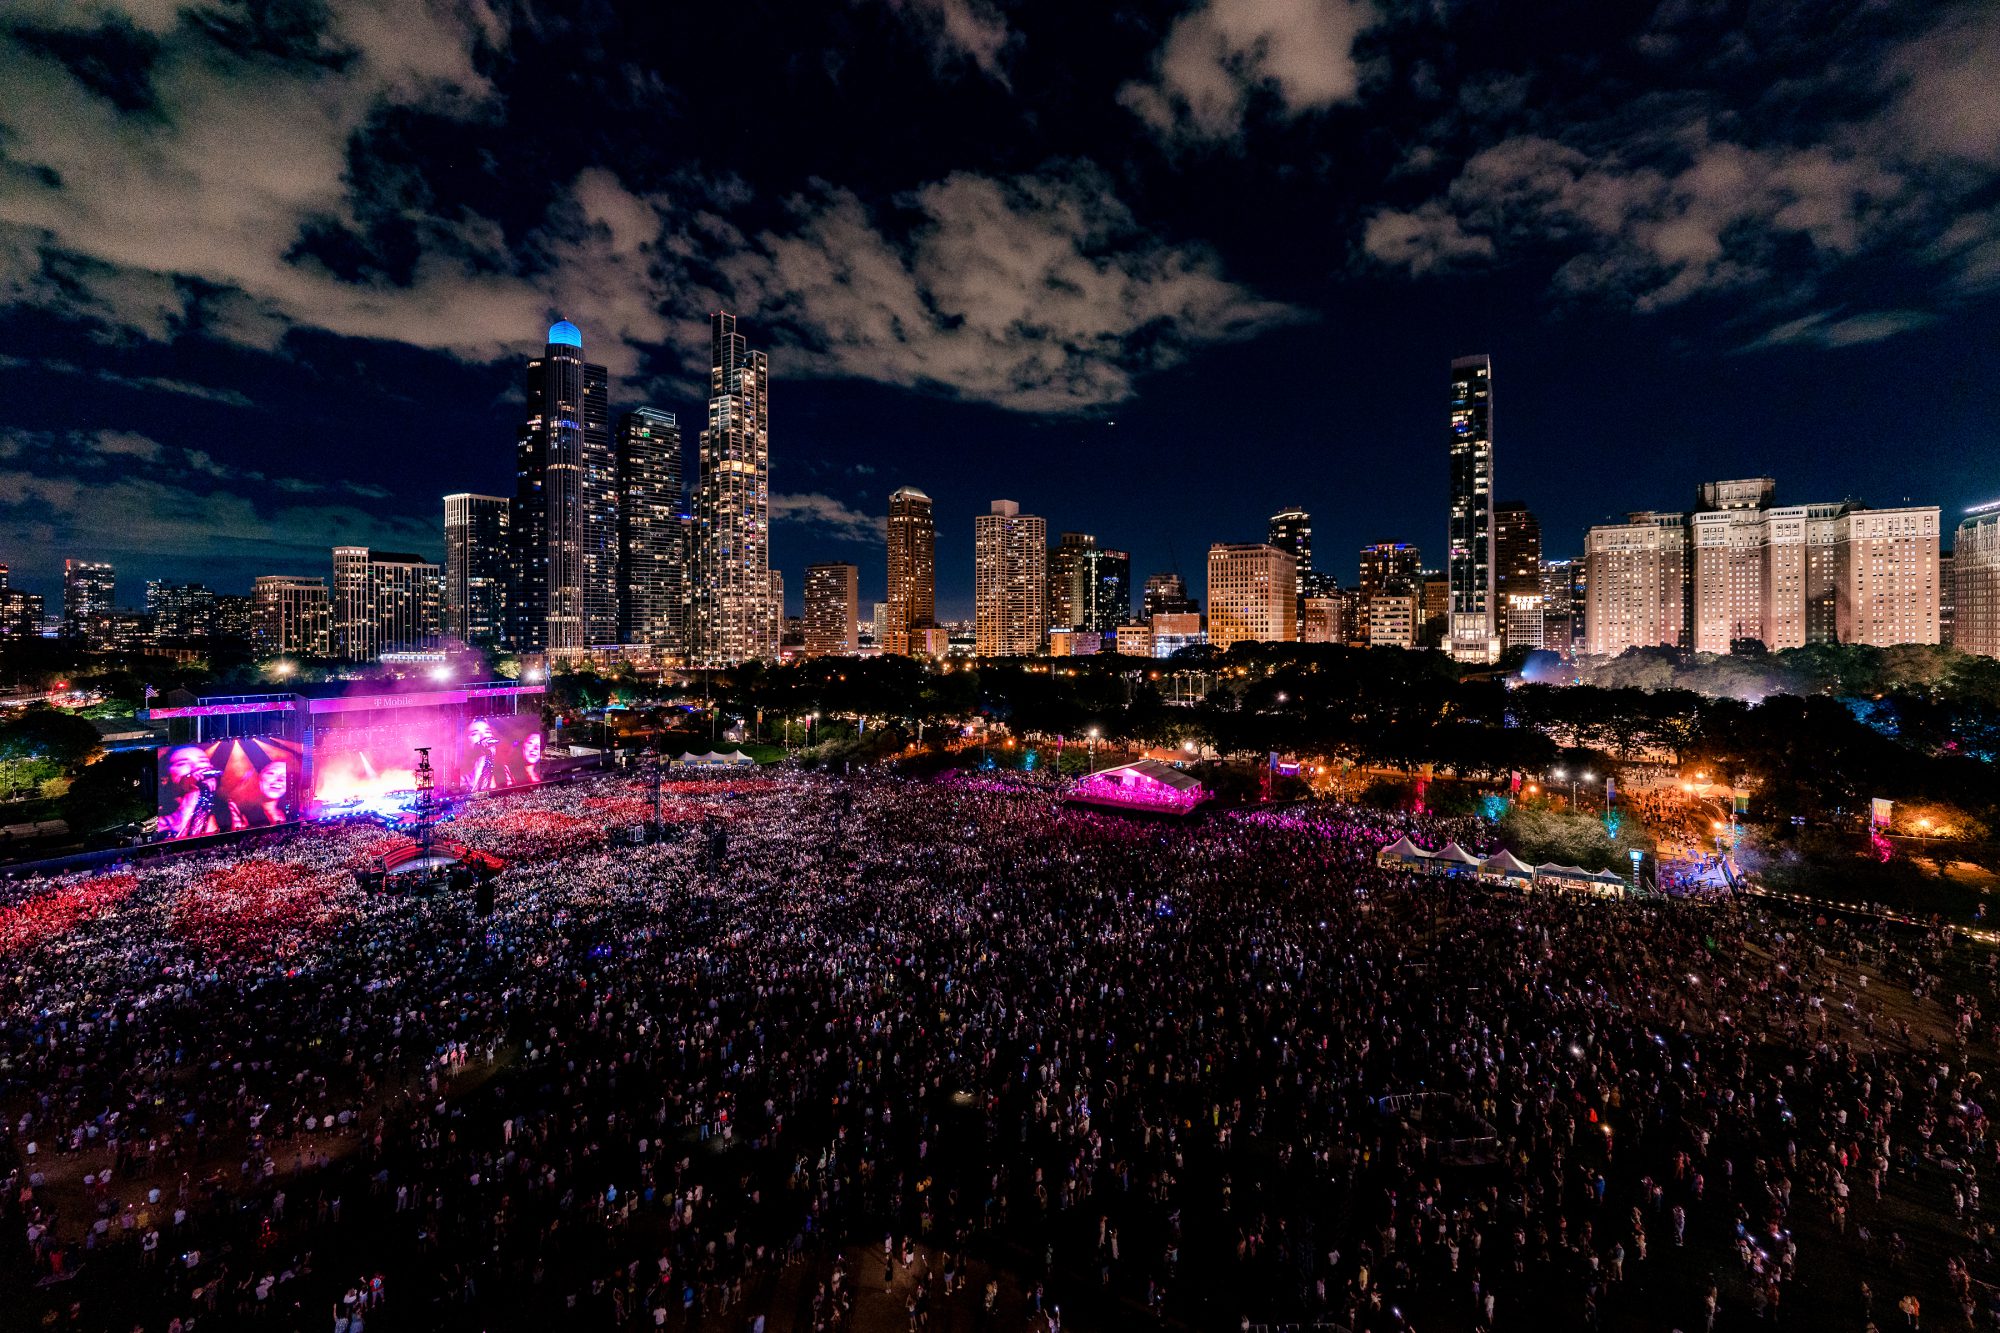 Aerials by Roger Ho for Lollapalooza 2022